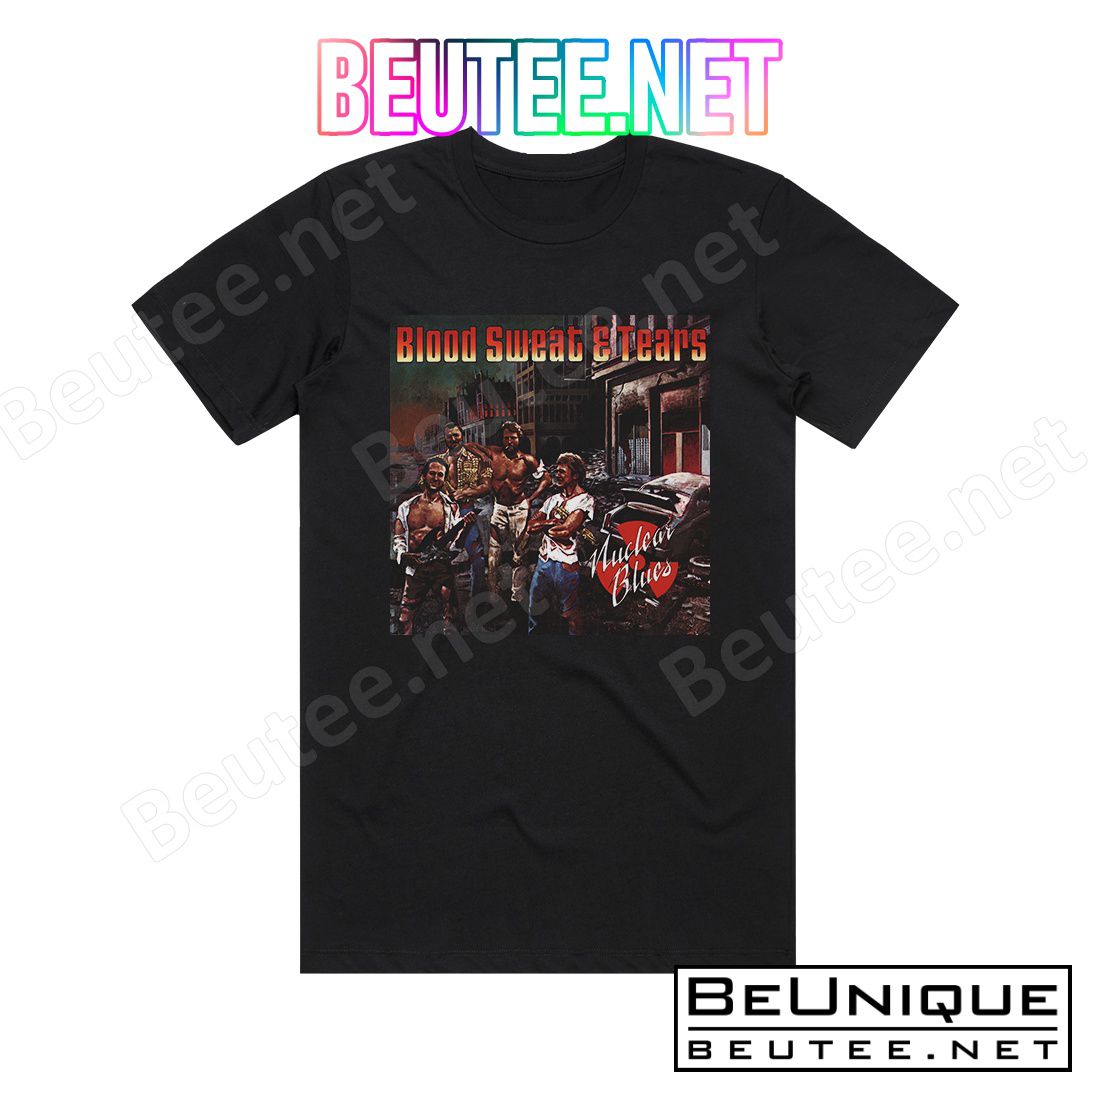 Blood Sweat and Tears Nuclear Blues 2 Album Cover T-Shirt